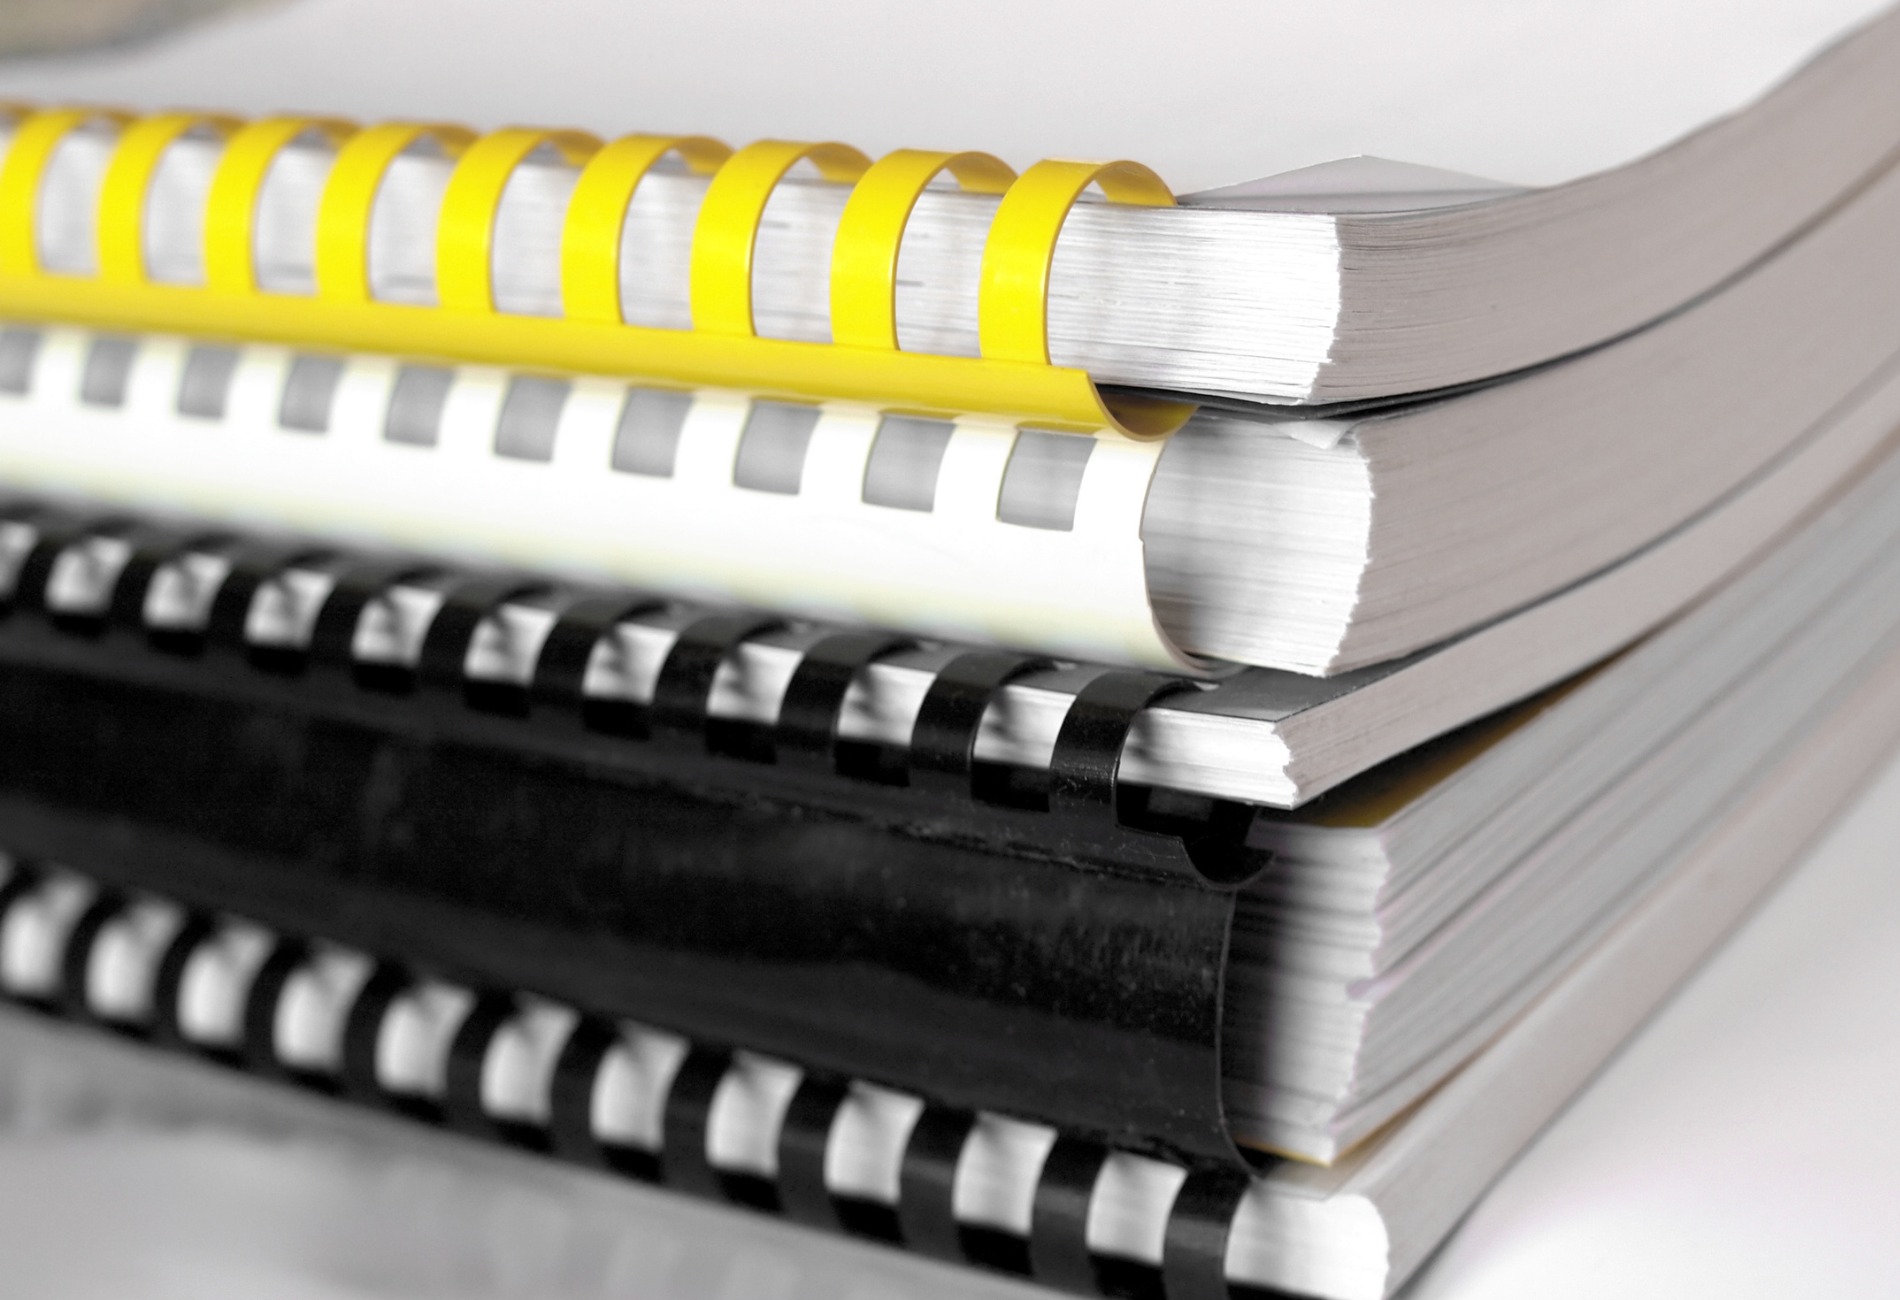 A stack of spiral bound books with yellow and black bindings